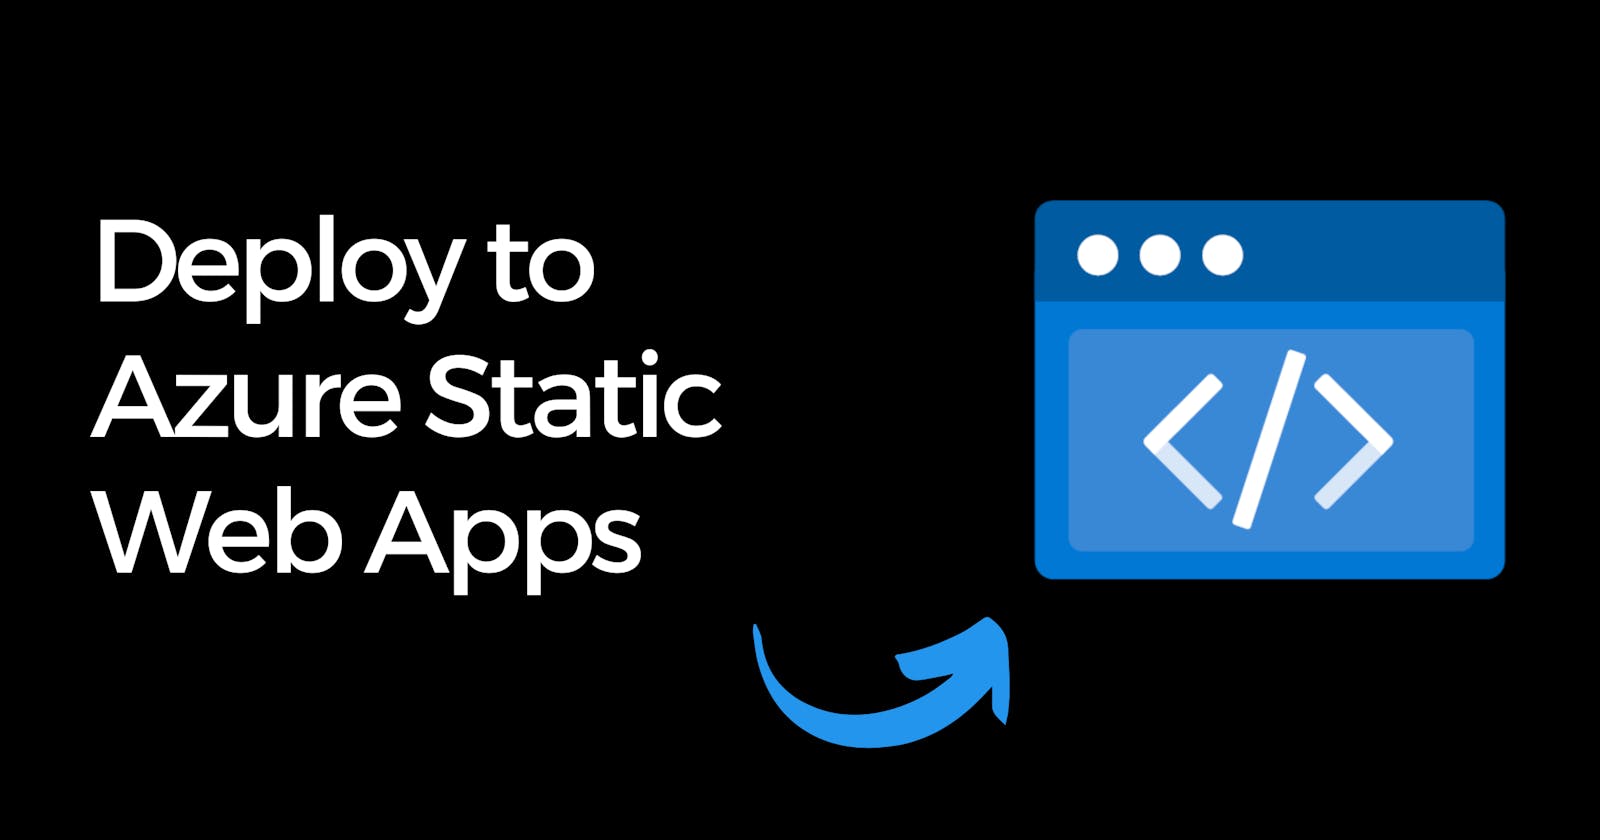 How easy it is to deploy with Azure Static Web Apps